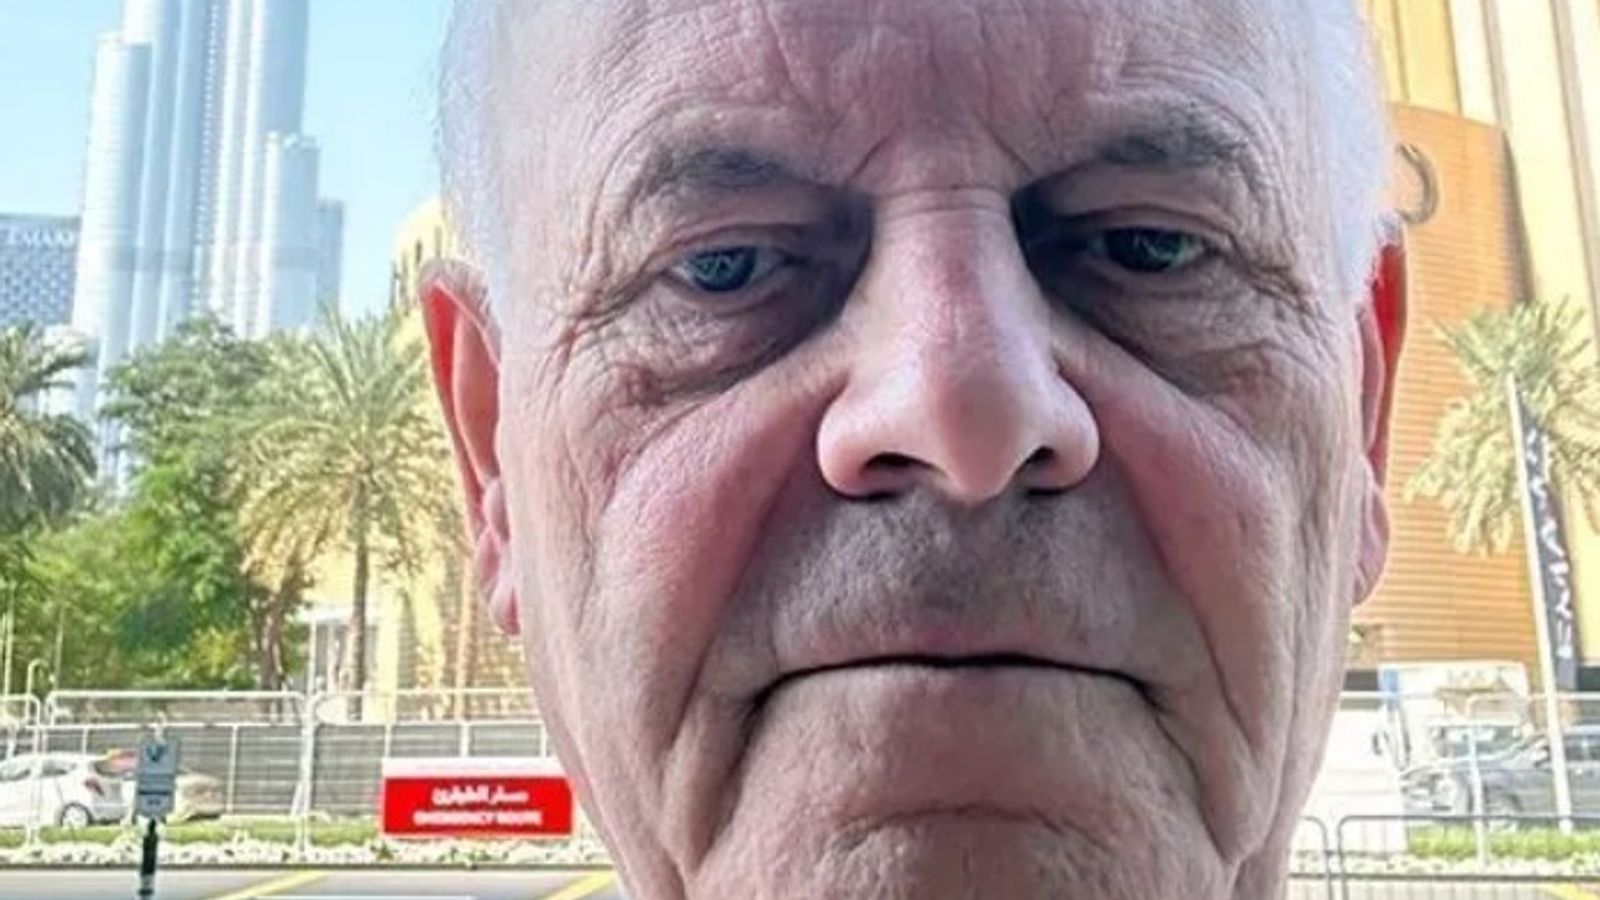 Aberdeenshire grandfather Ian Mackellar free to leave Dubai after court fine over party row